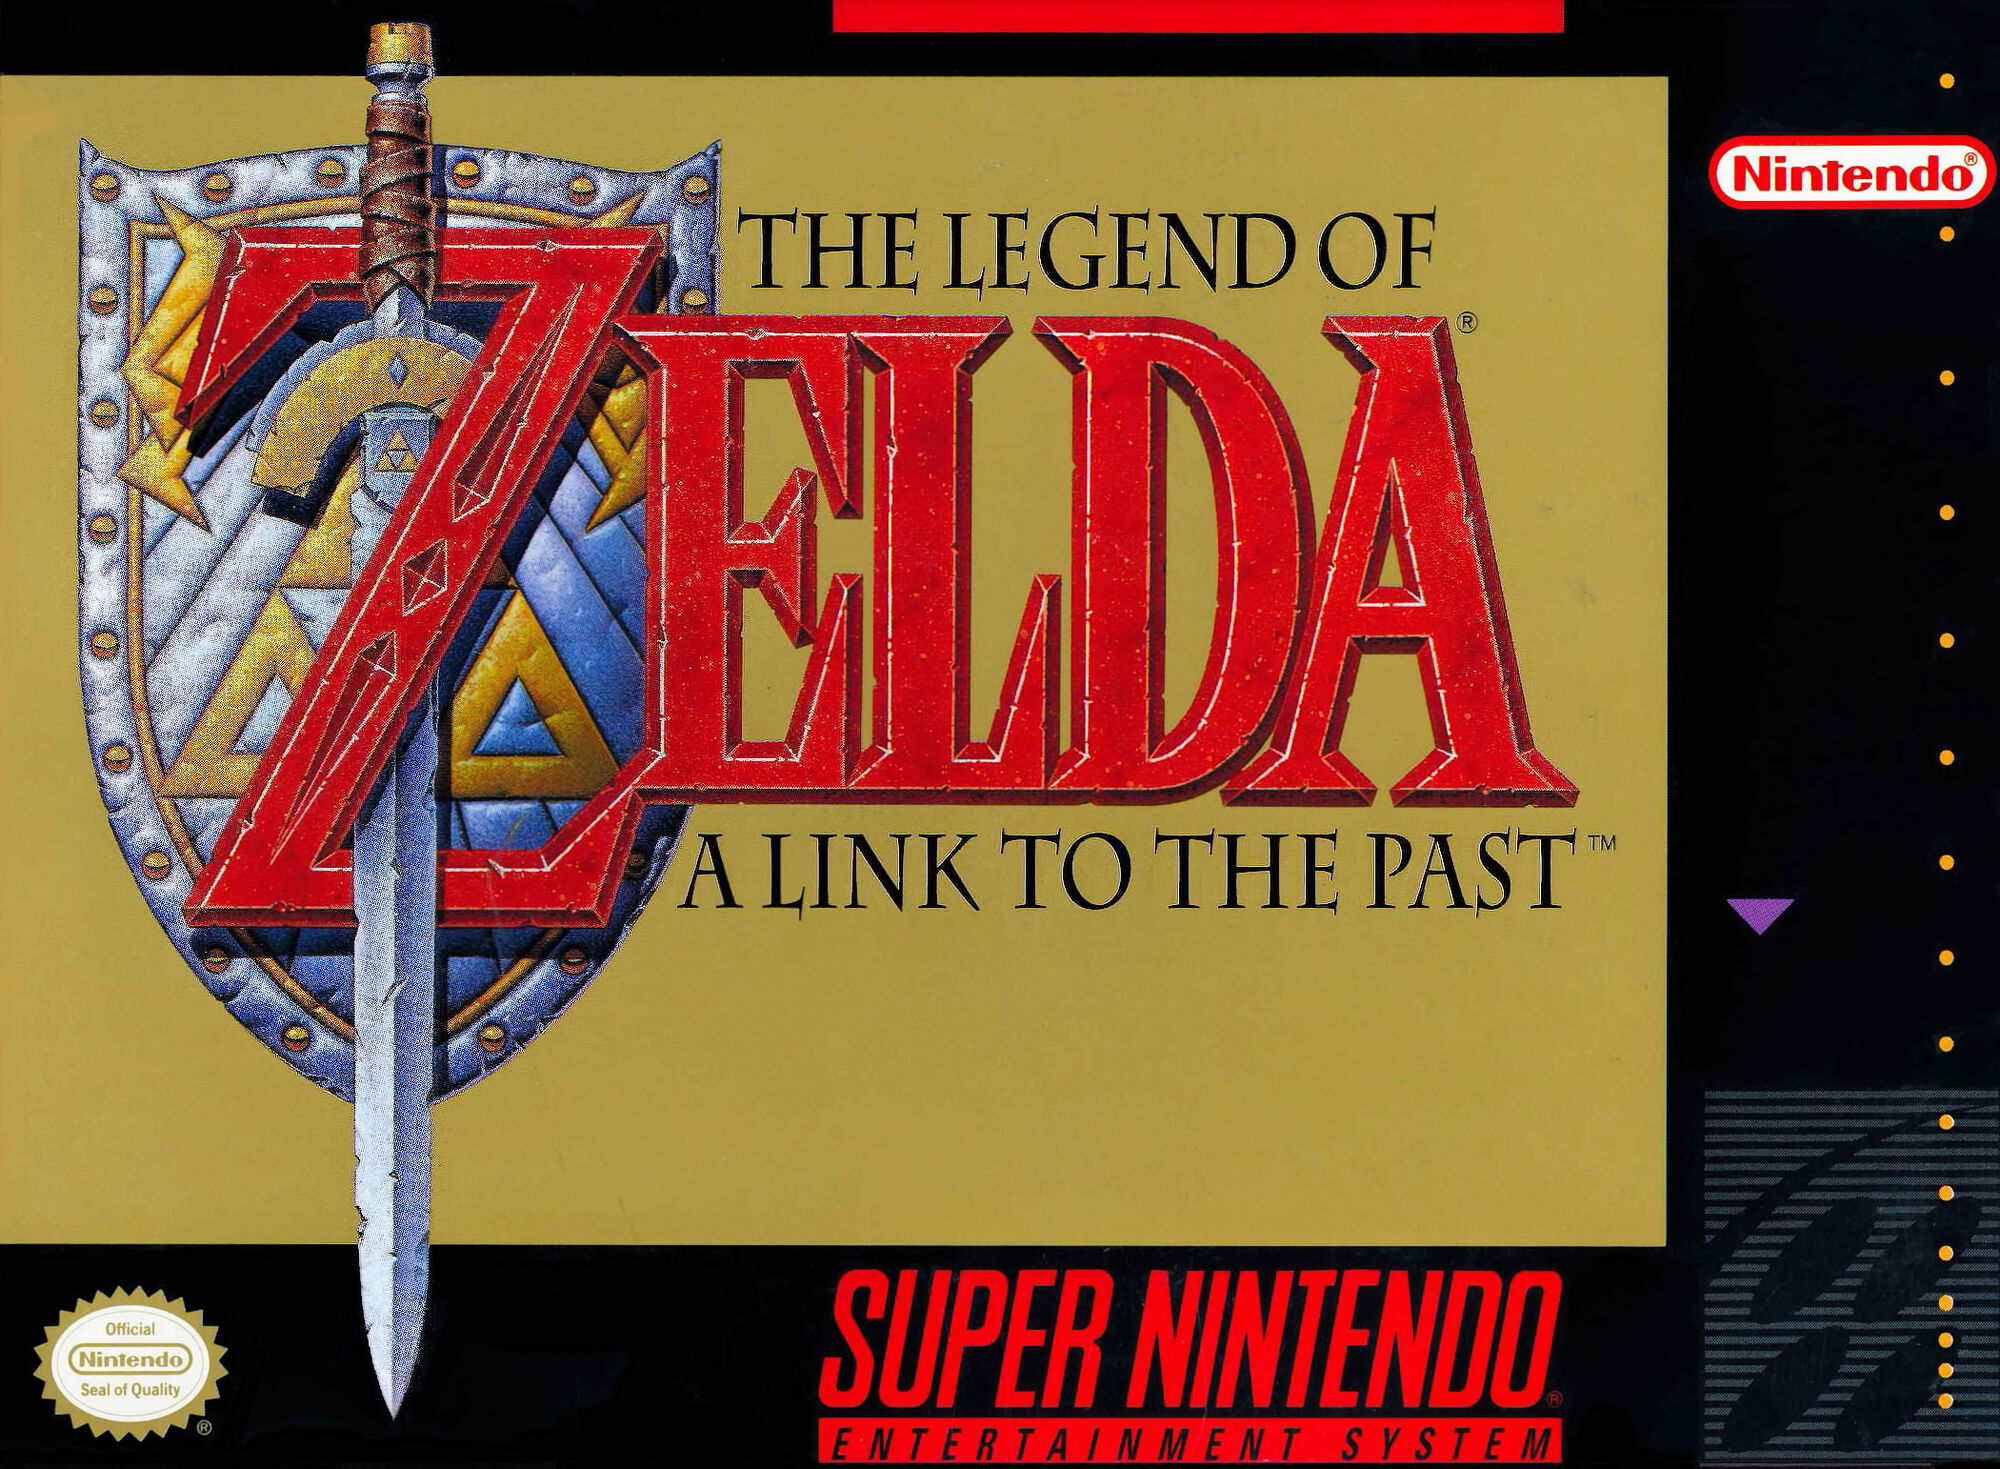 the-legend-of-zelda-a-link-to-the-past-game-grumps-wiki-fandom-powered-by-wikia